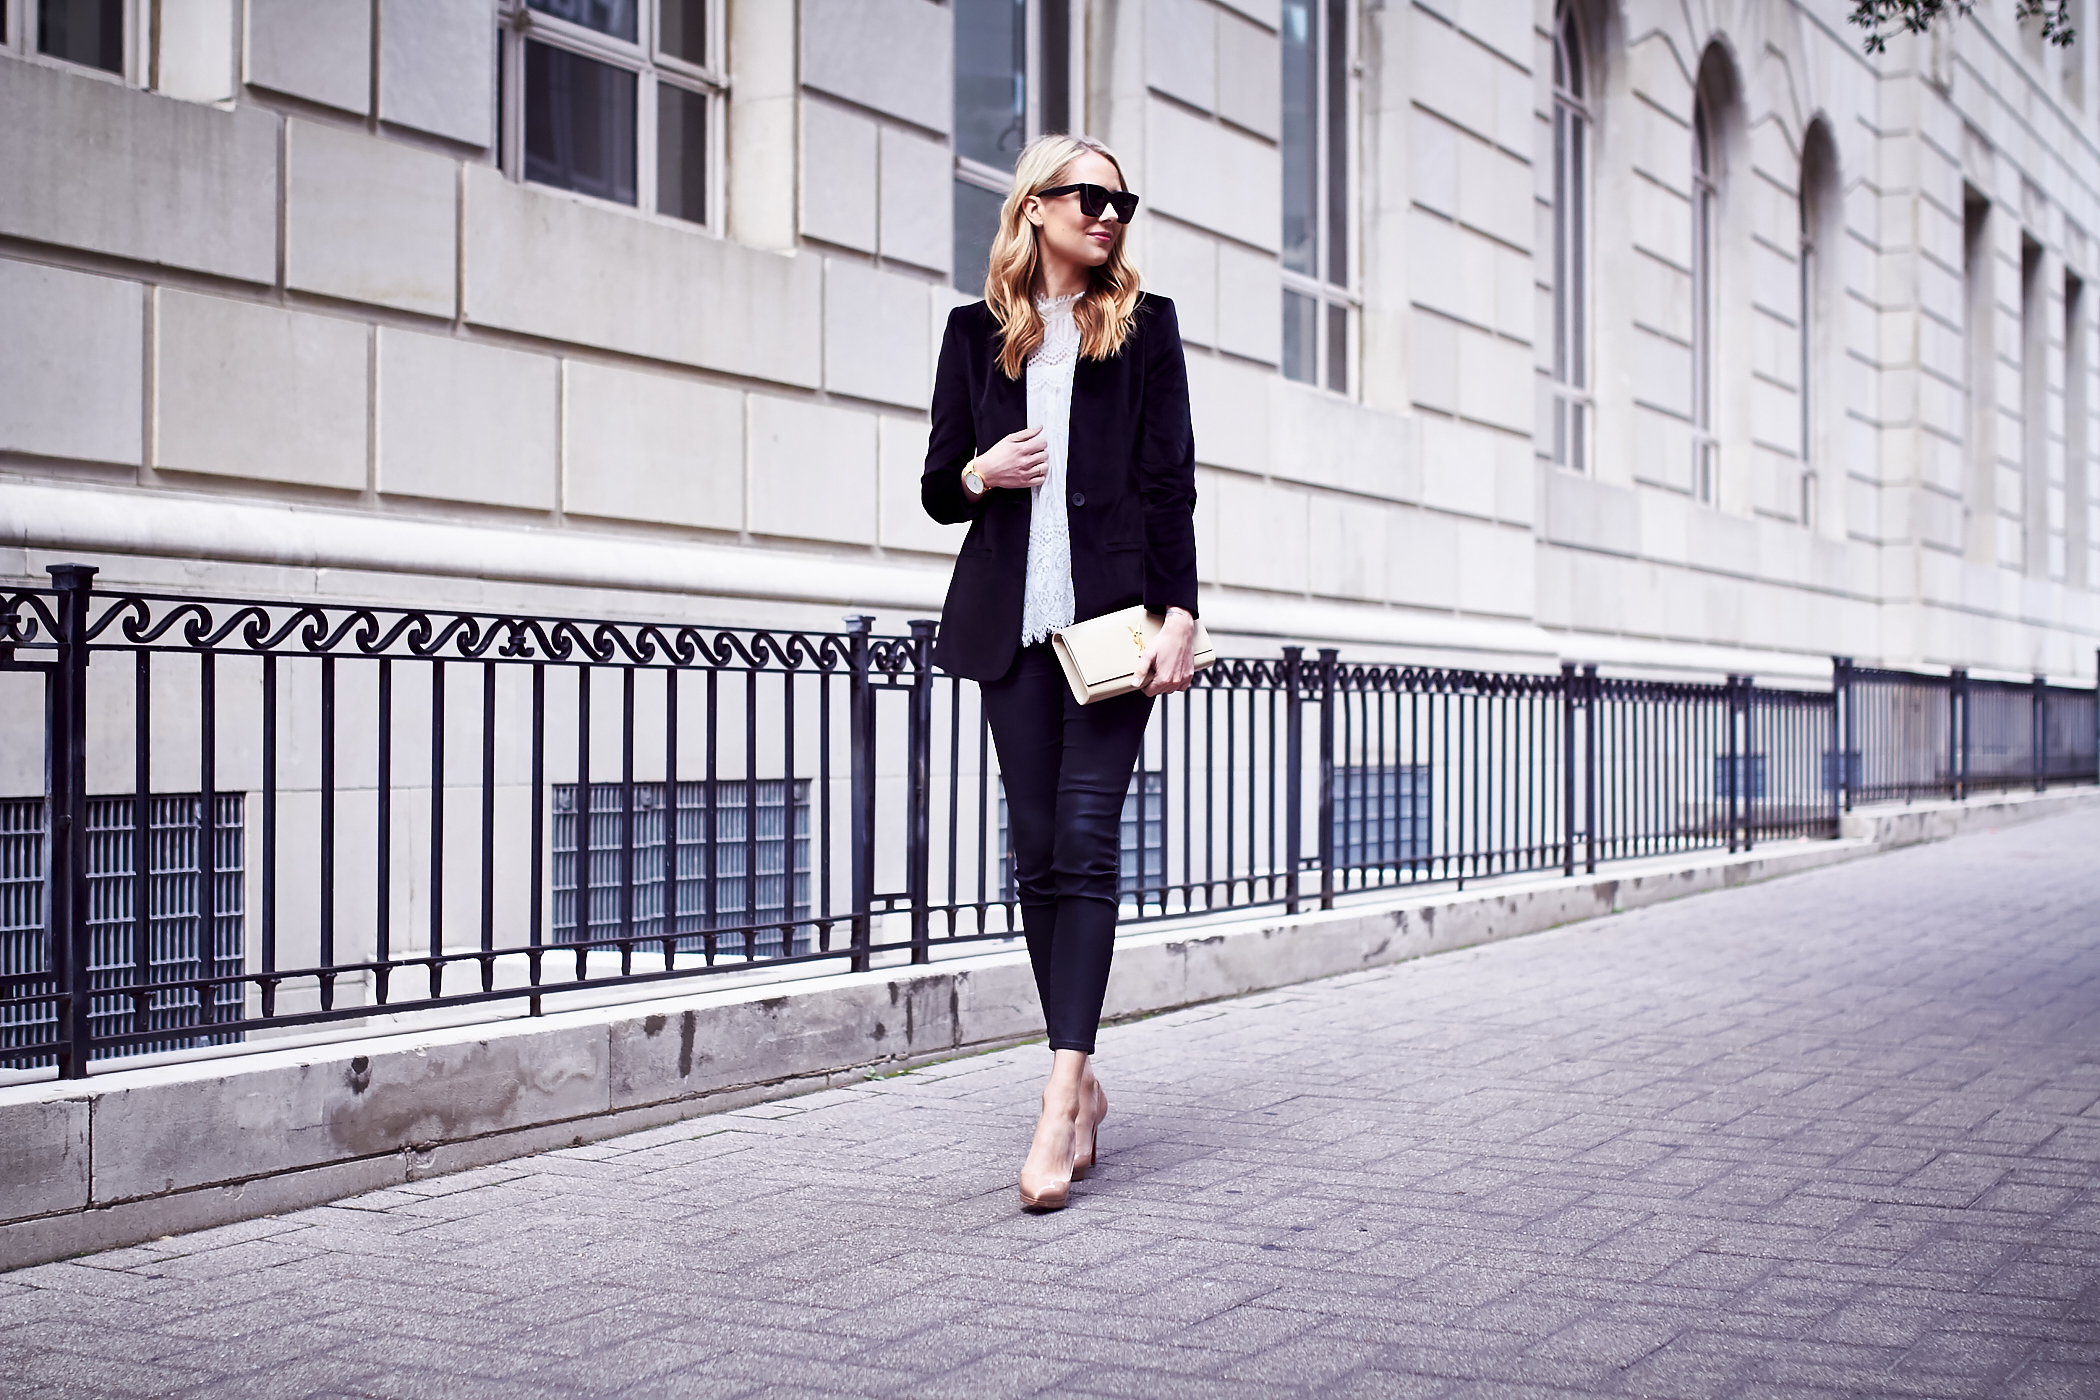 Fall Outfit, Holiday Outfit, White Lace Top, Black Velvet Blazer, Saint Laurent Clutch, Black Skinny Jeans, Nude Pumps